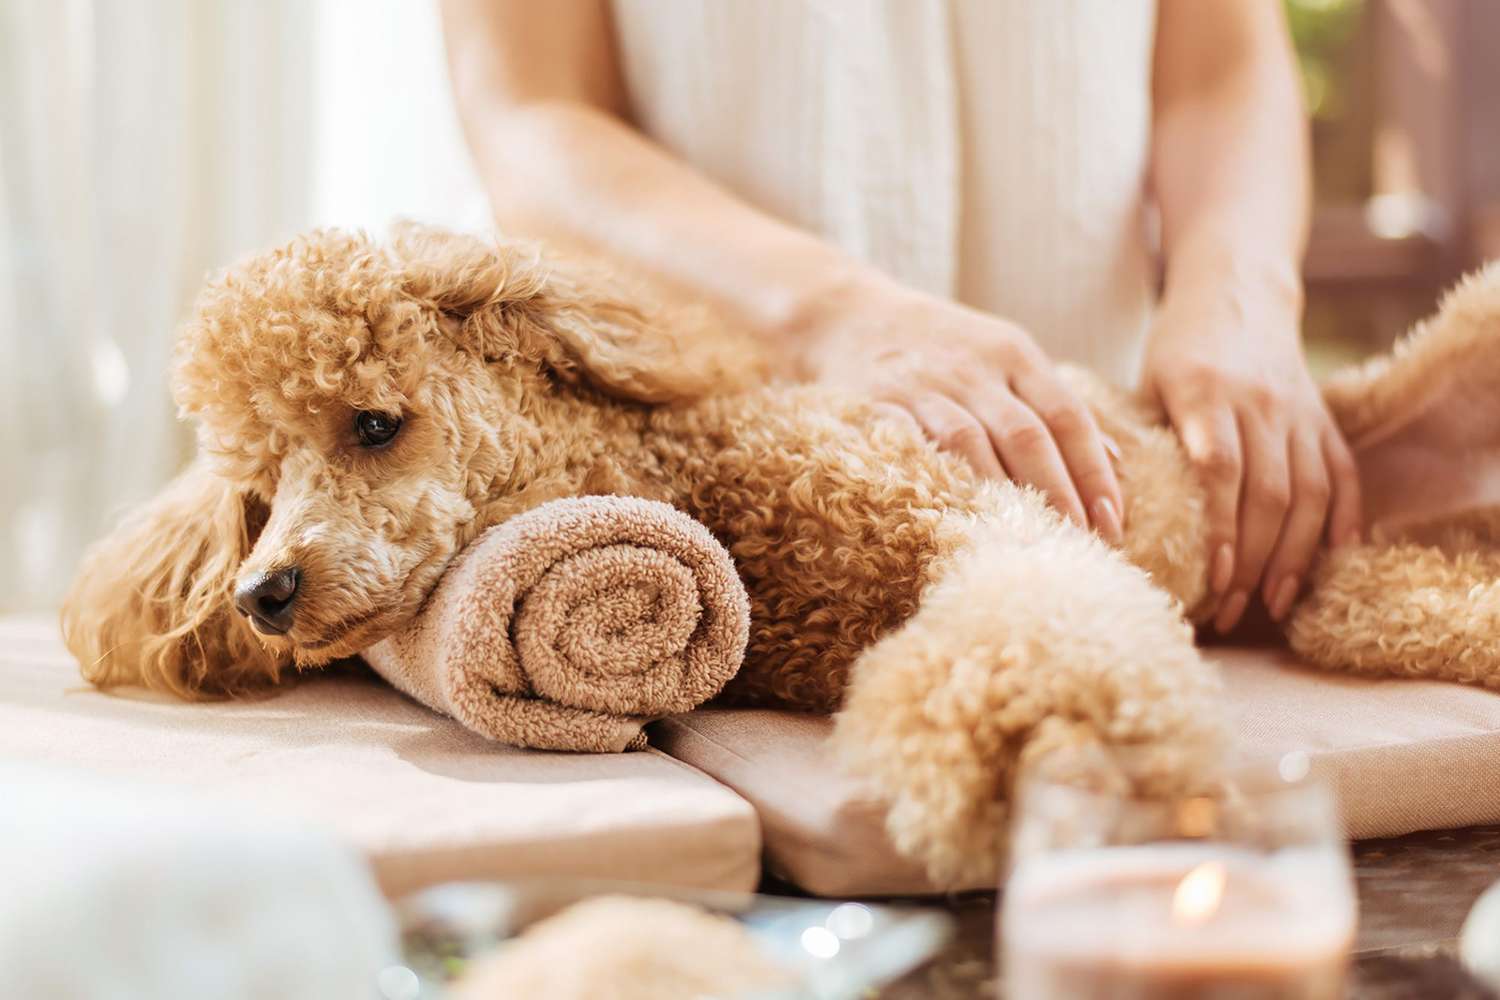 How To Give A Dog Massage For Arthritis